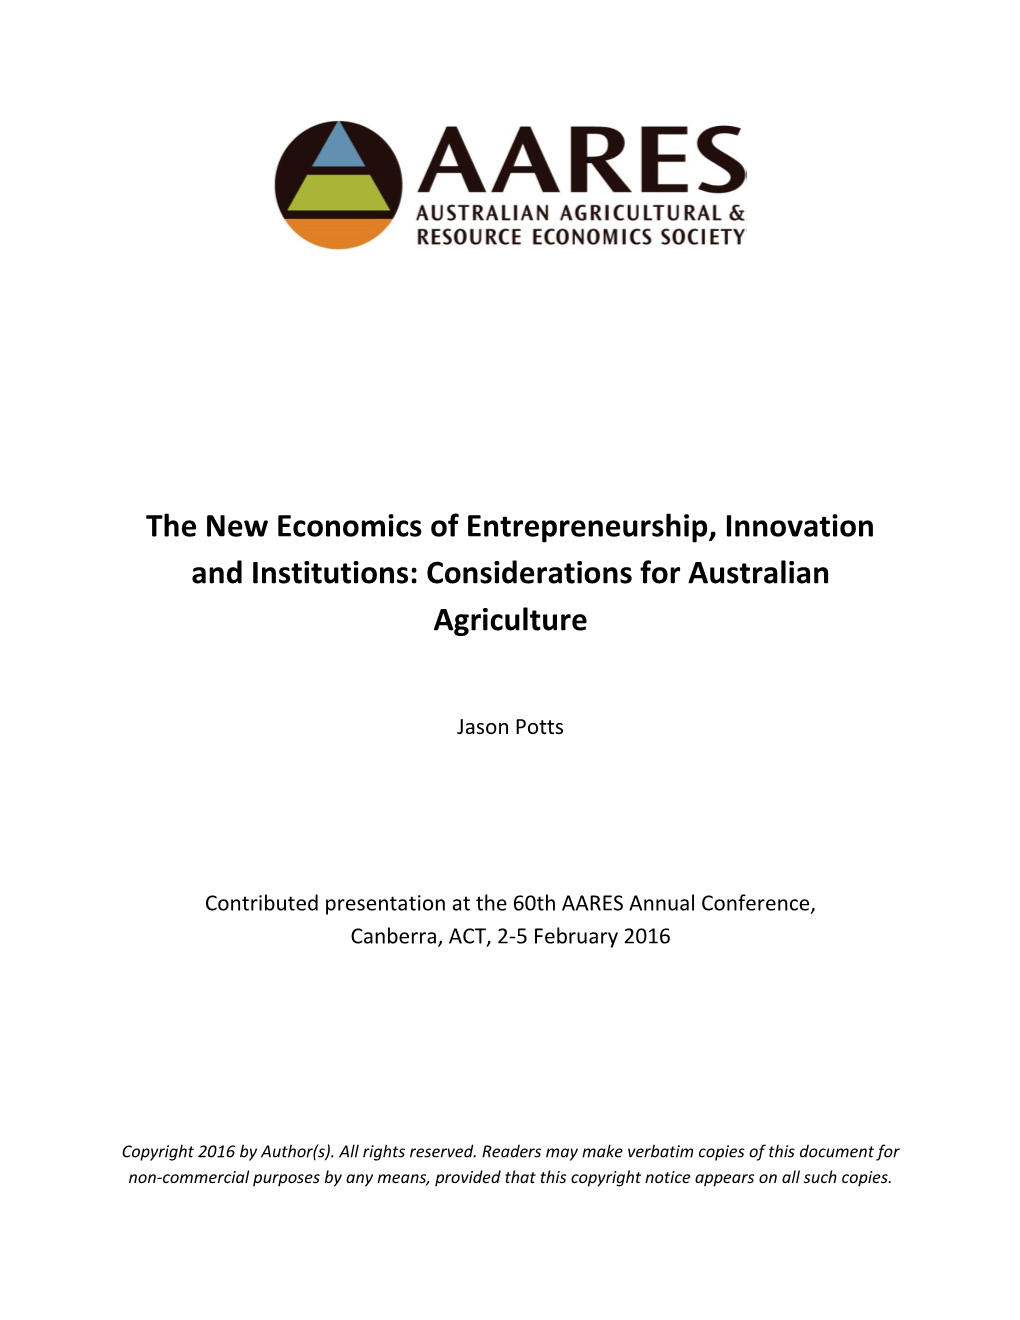 The New Economics of Entrepreneurship, Innovation and Institutions: Considerations for Australian Agriculture